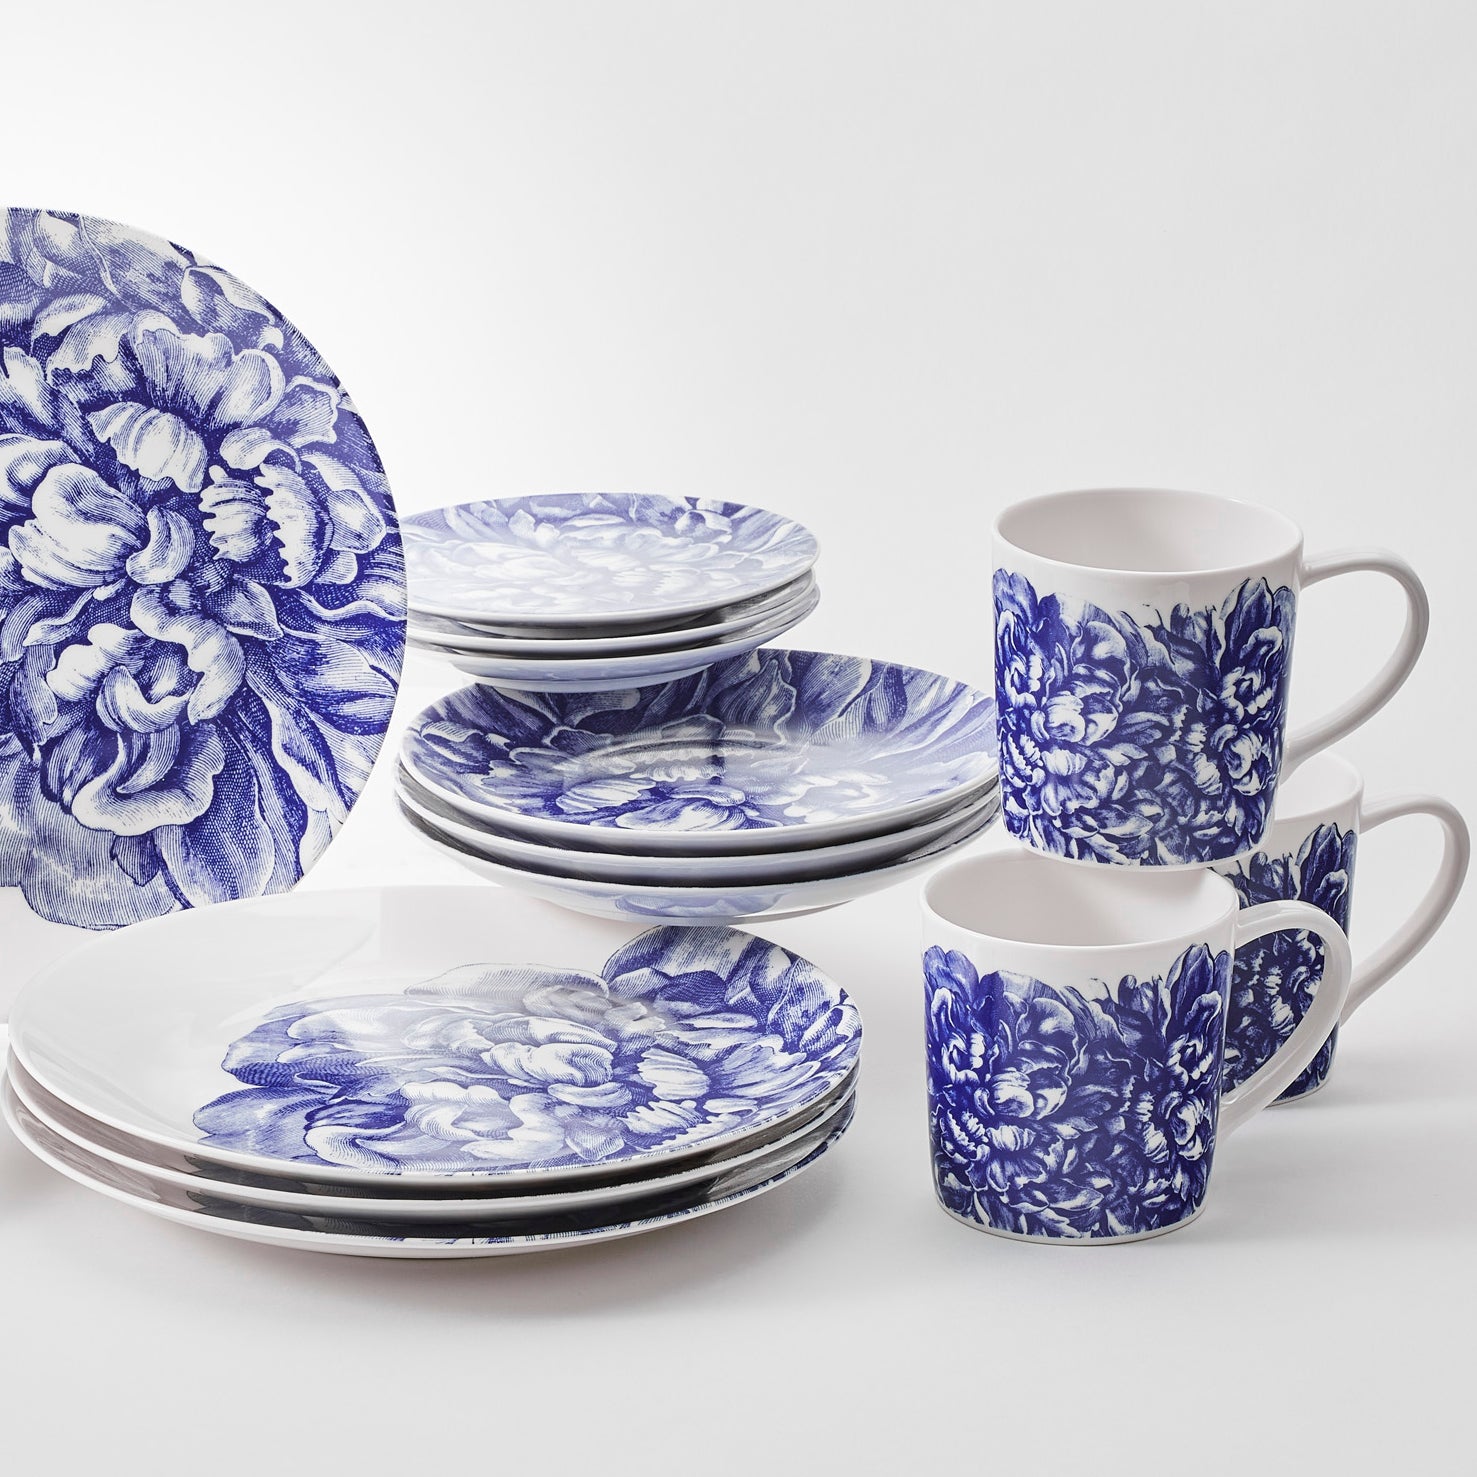 Peony pattern in blue and white porcelain 16 piece dinnerware set from Caskata